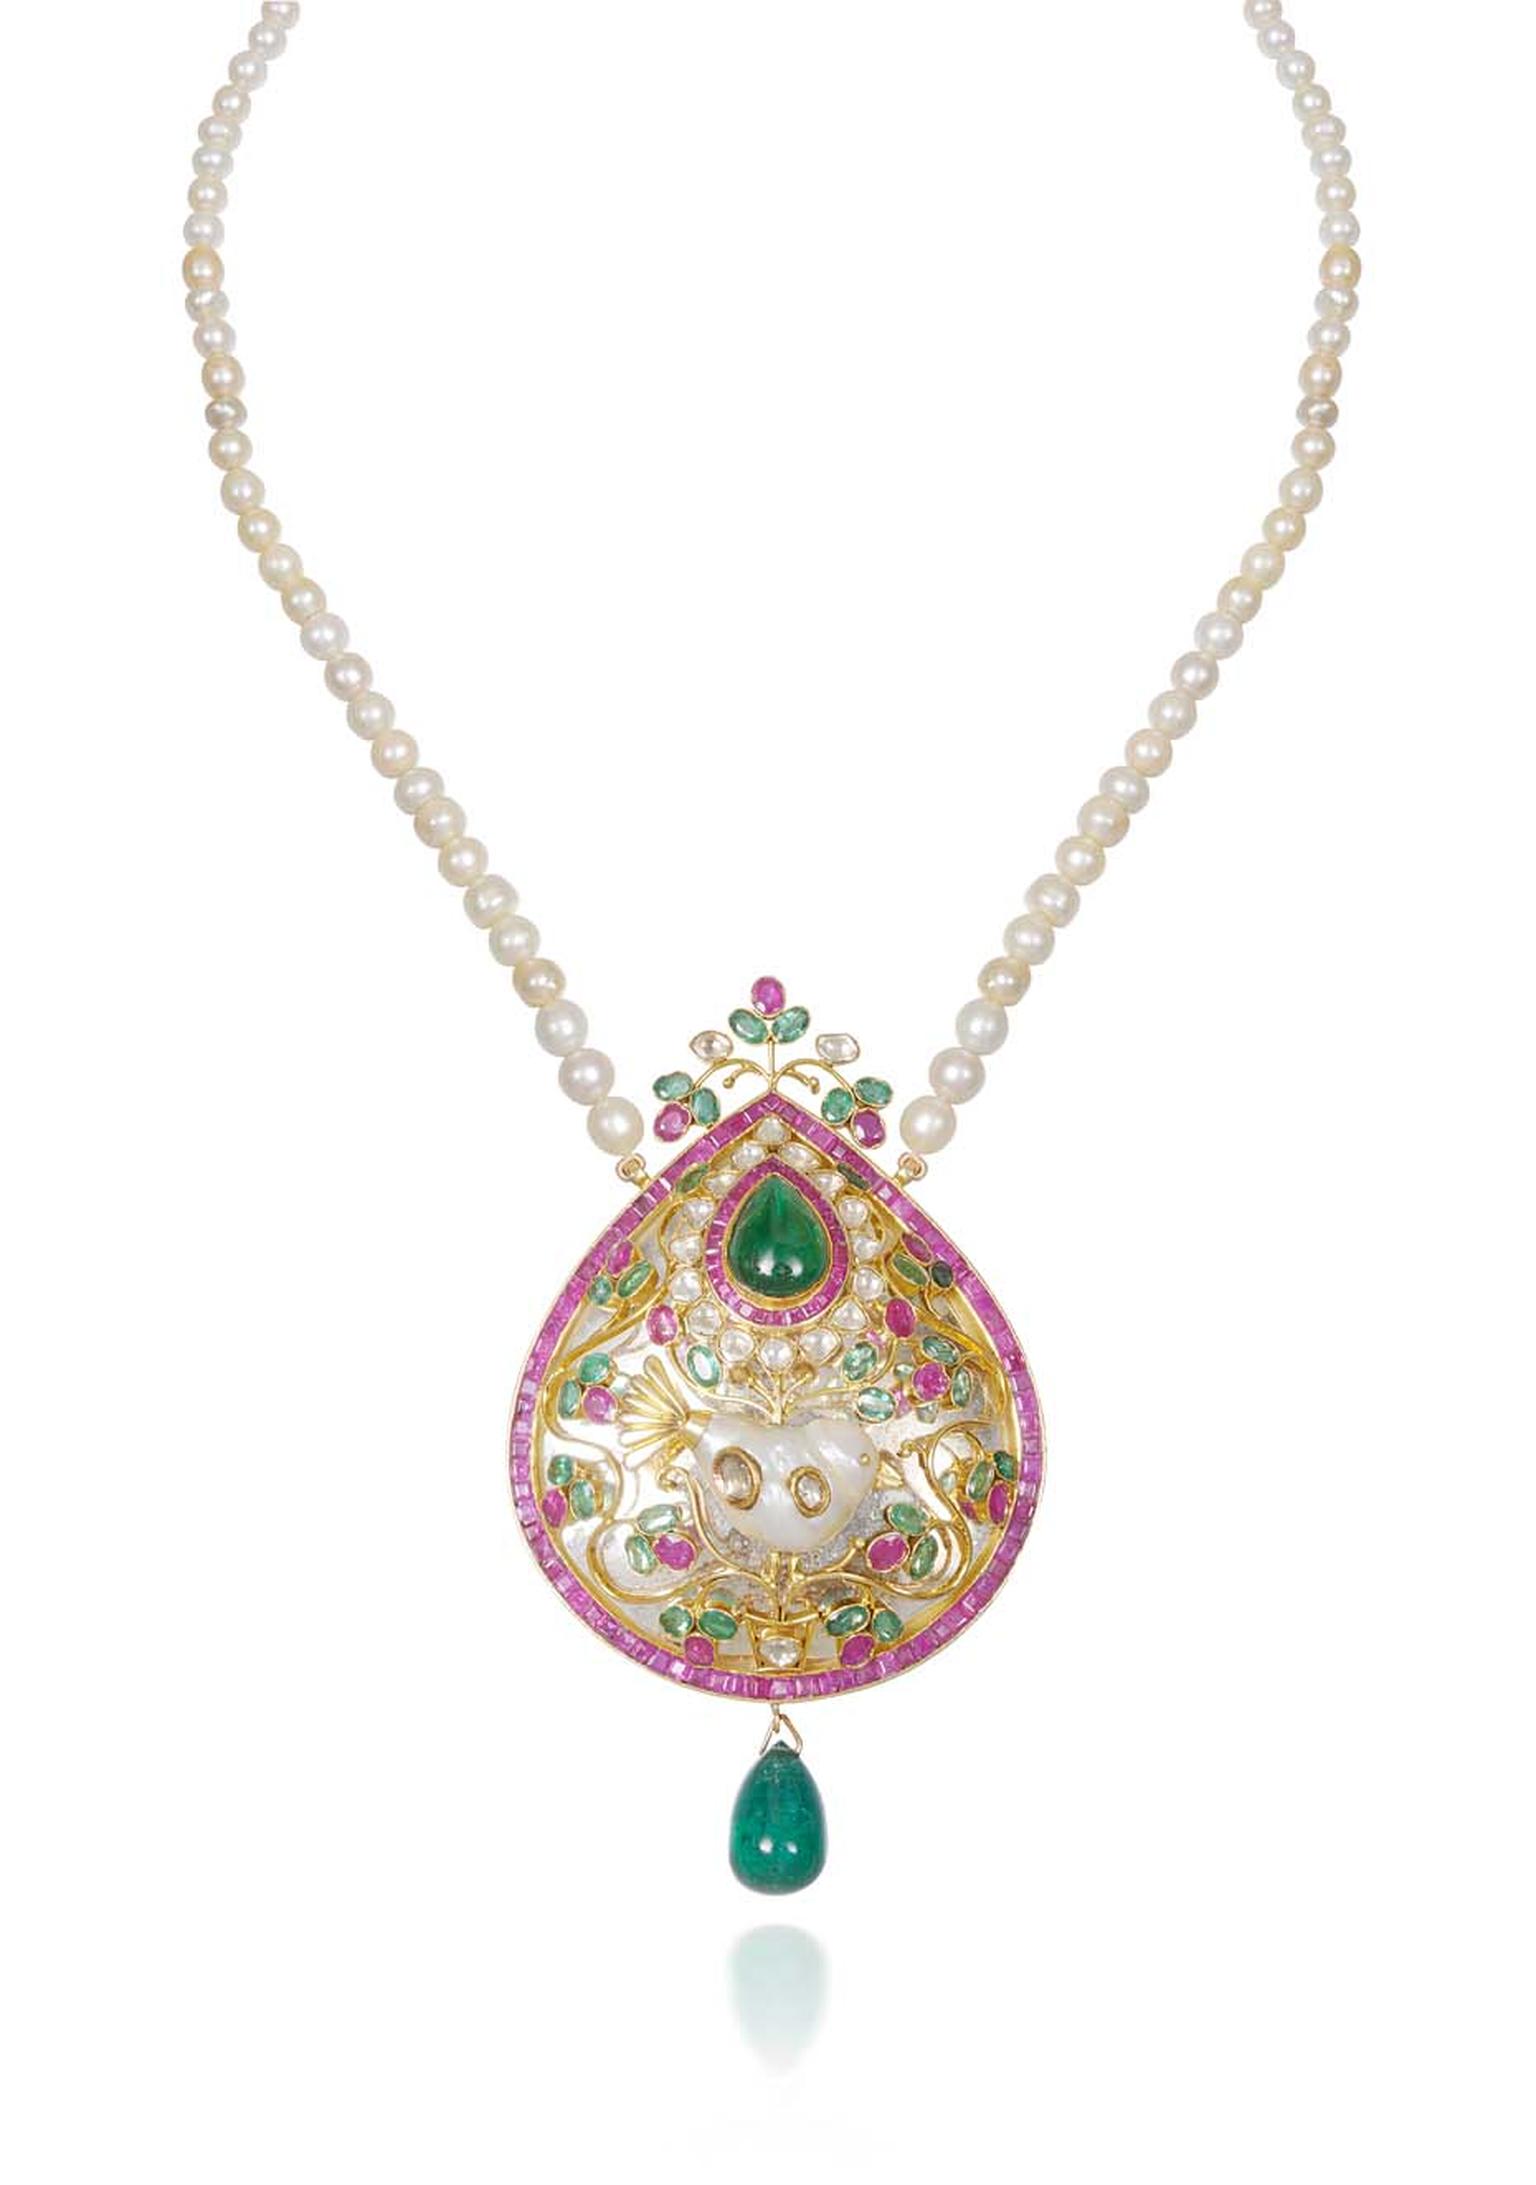 Lot 5, a traditional Kundan pendant harnessed by a string of pearls and set with diamonds and Gemfields emeralds and rubies, created by Lala Jugal Kishore Jewellers (estimate: INR 3,650,000 - 4,400,000; $61,000 - 73,500)